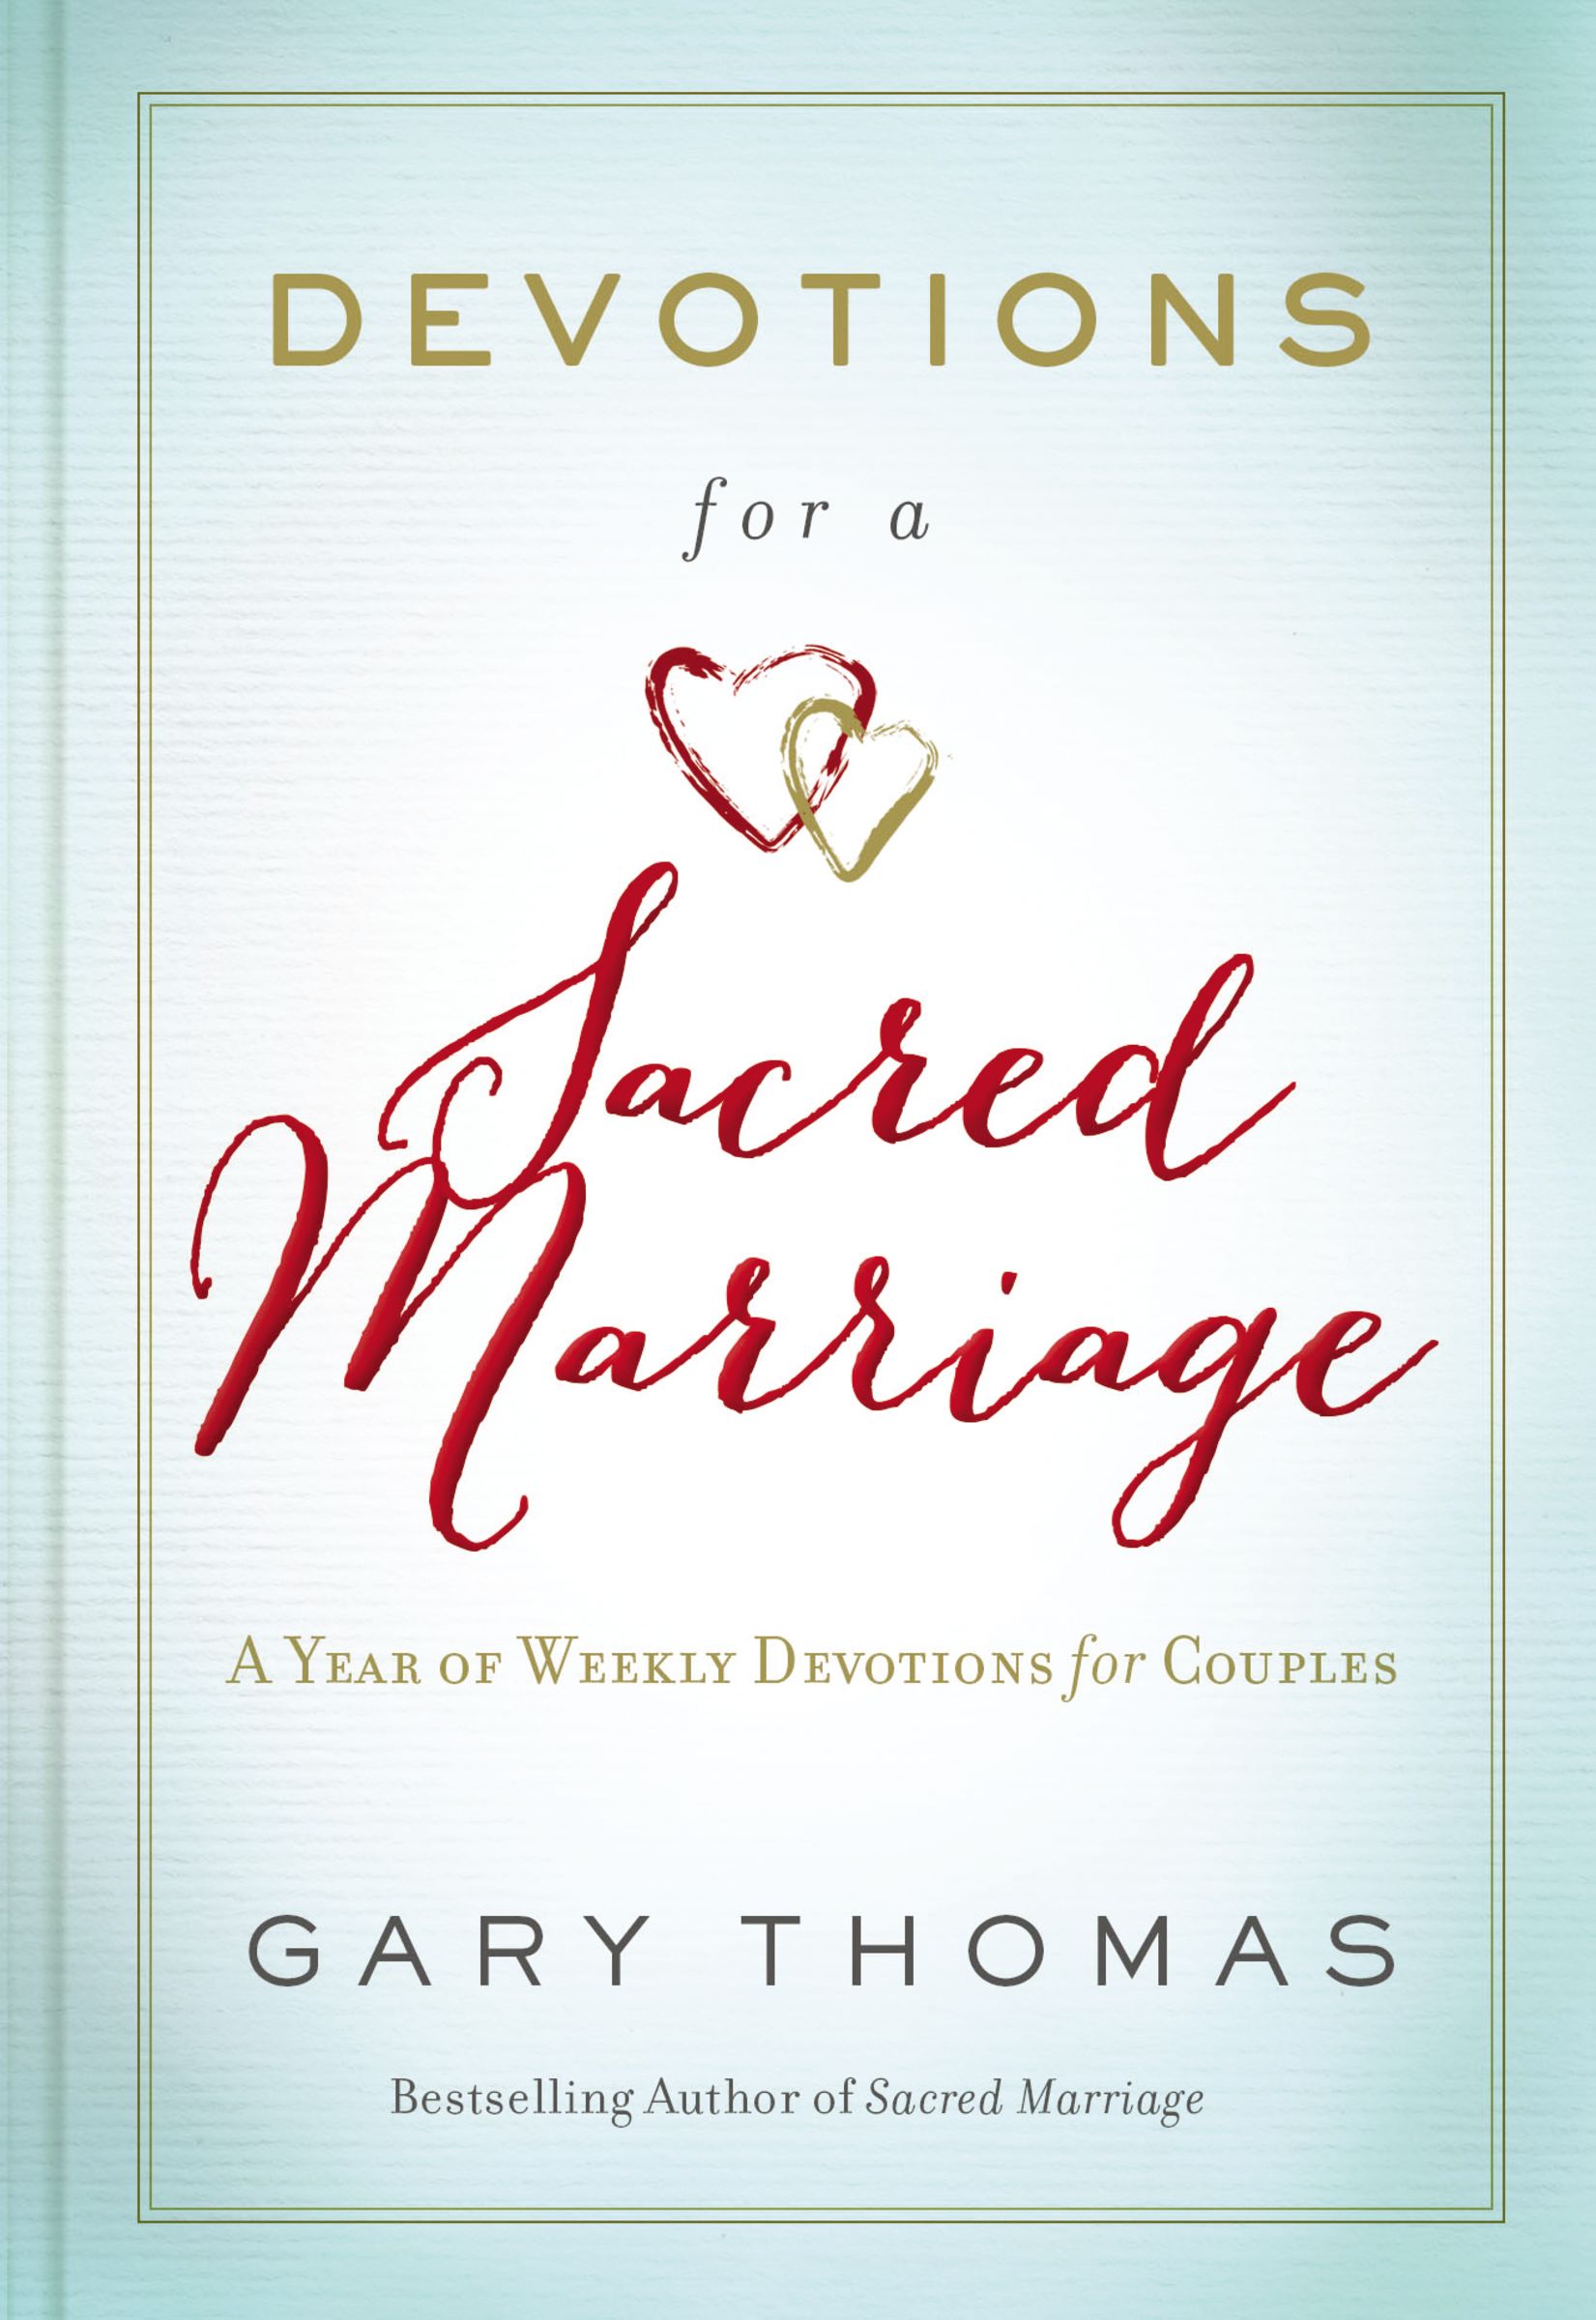 Free online devotions for dating couples pdf